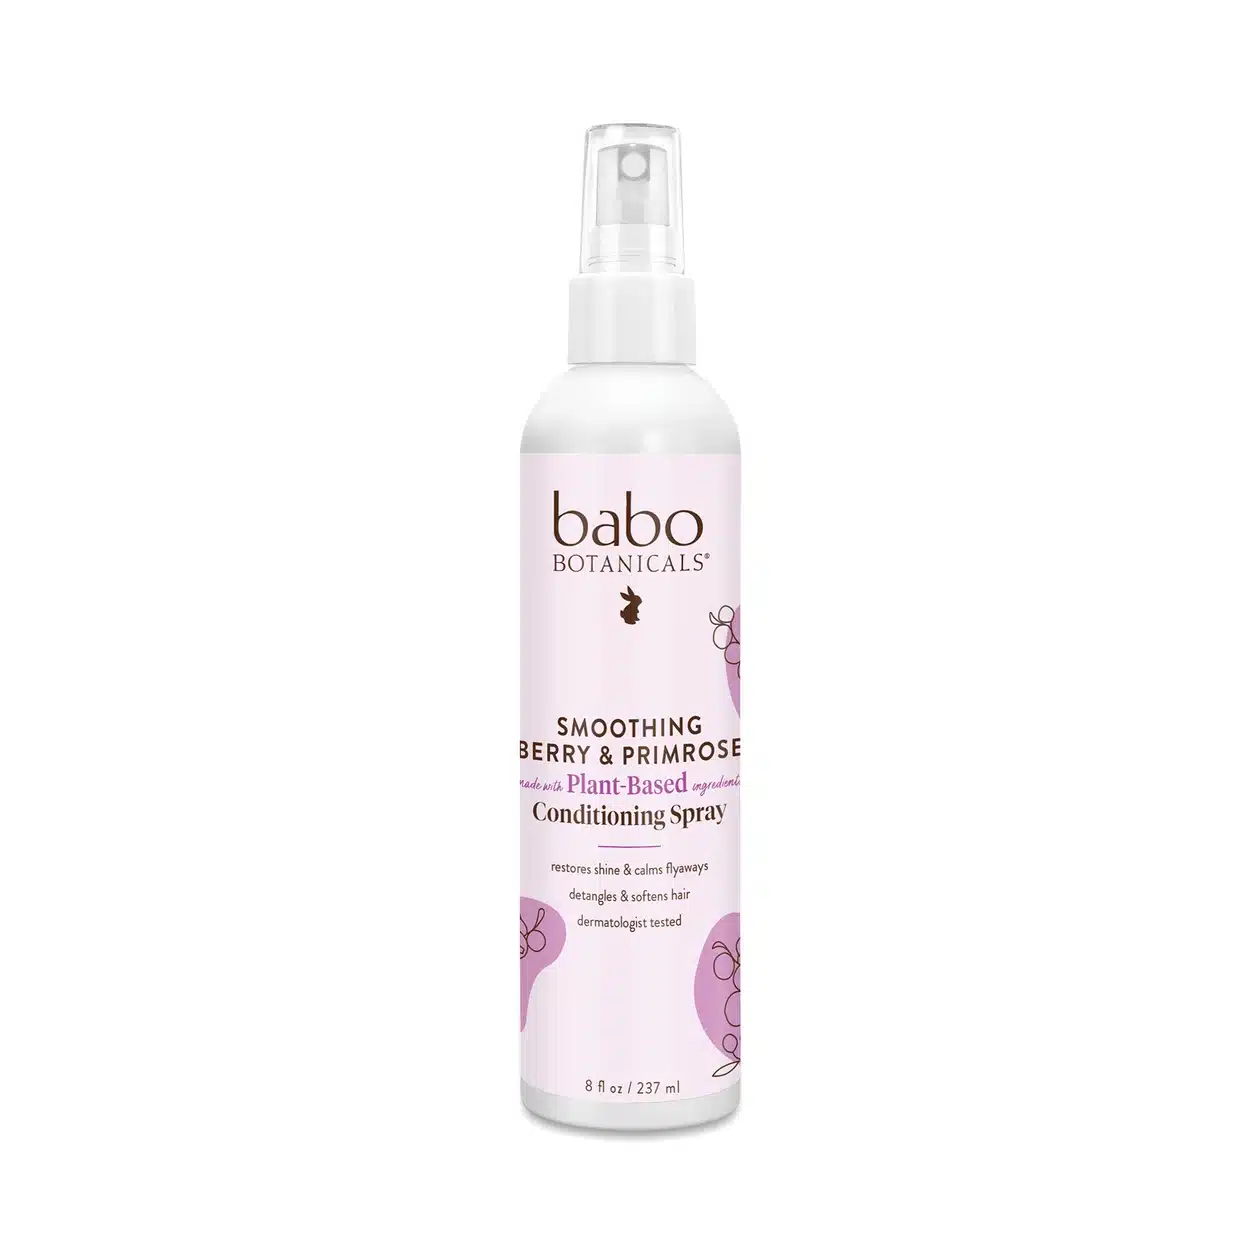 Babo Botanicals Smoothing Detangling Spray from gimme the good stuff